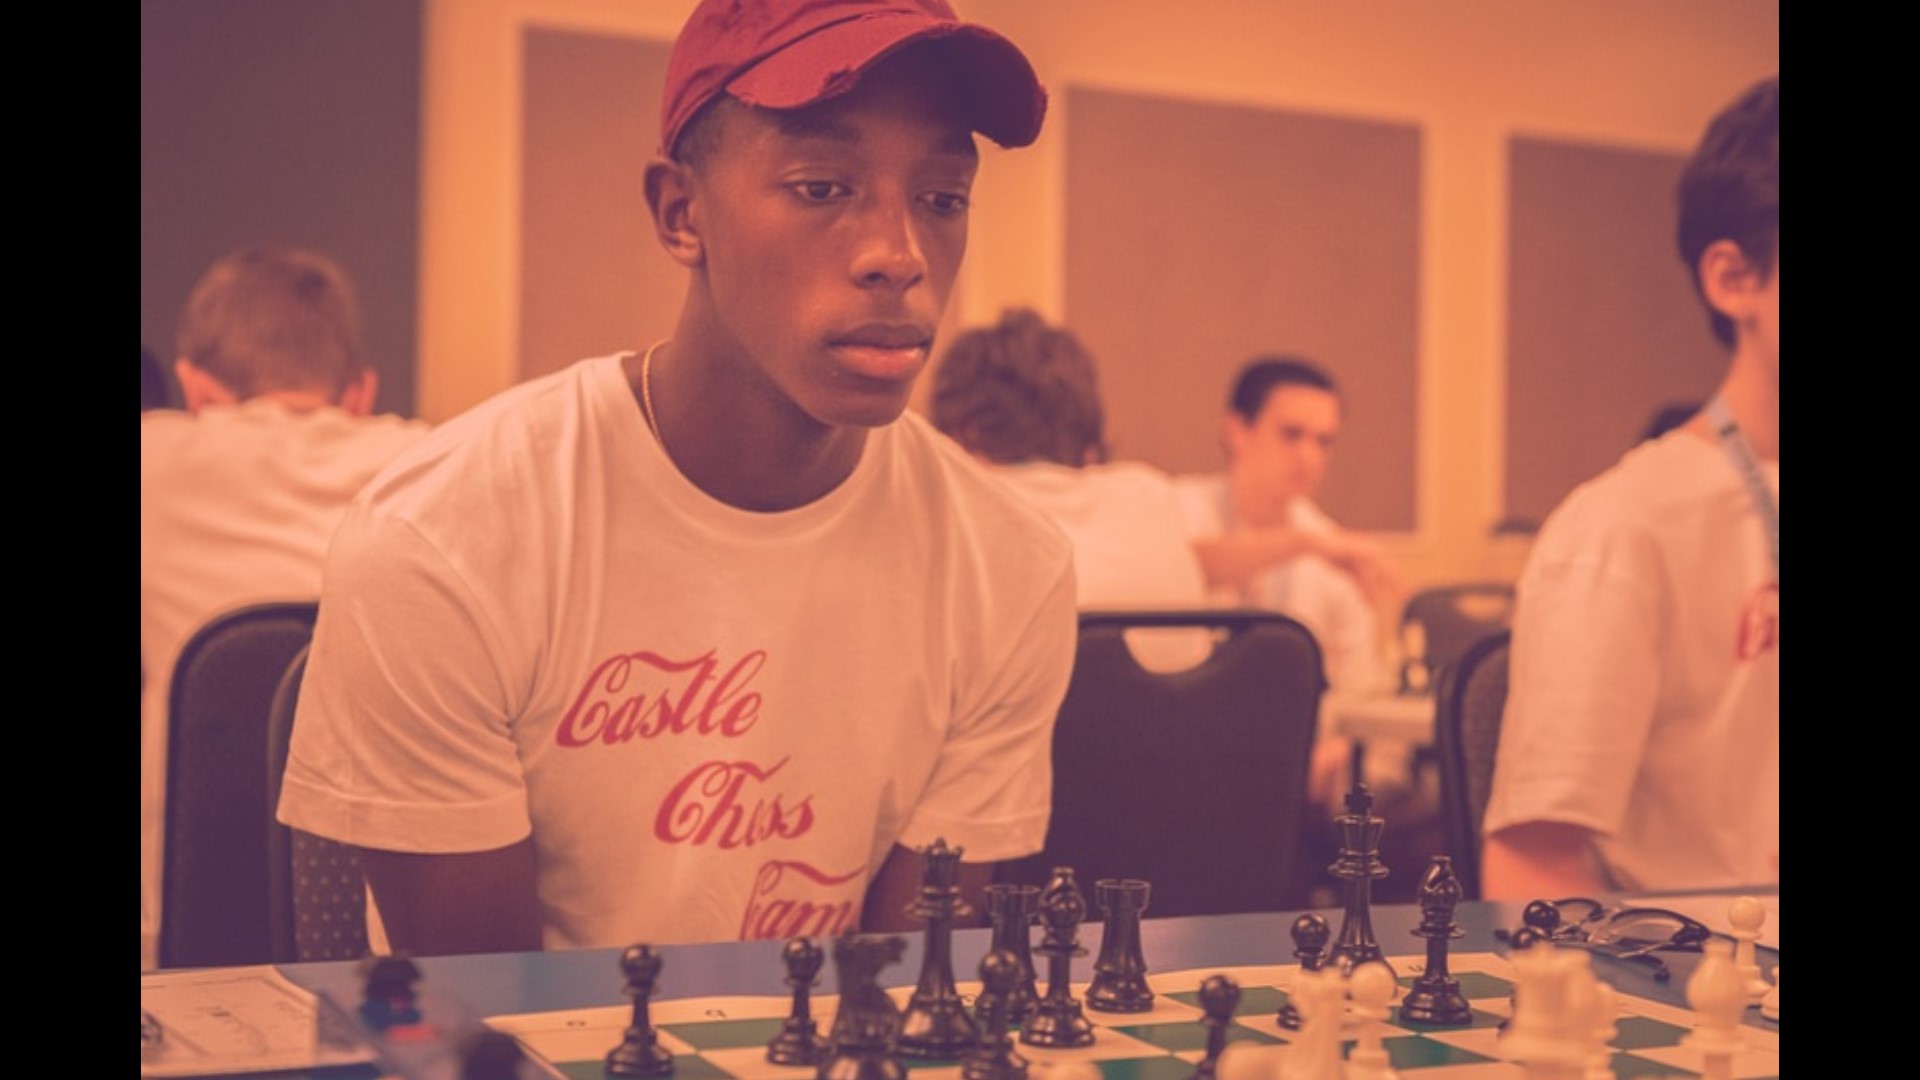 Meet this high school senior who’s making the best of his time at home by teaching chess lessons online